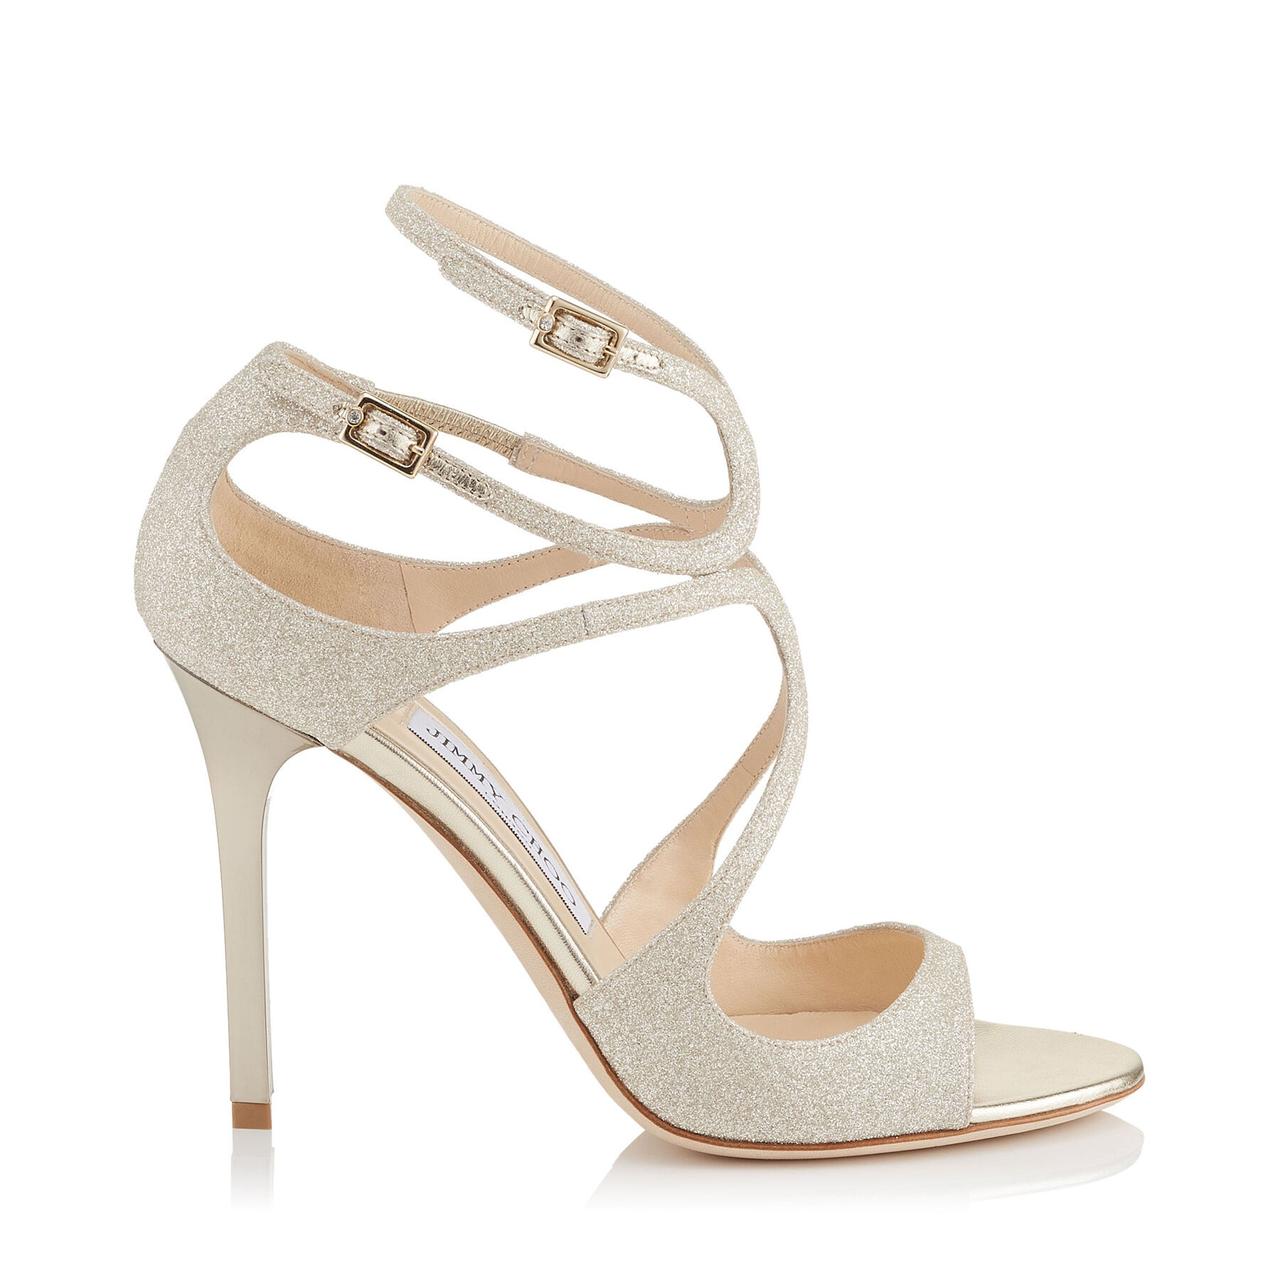 Jimmy Choo Bridal Shoes: The 10 Styles We’re Lusting After (& How to ...